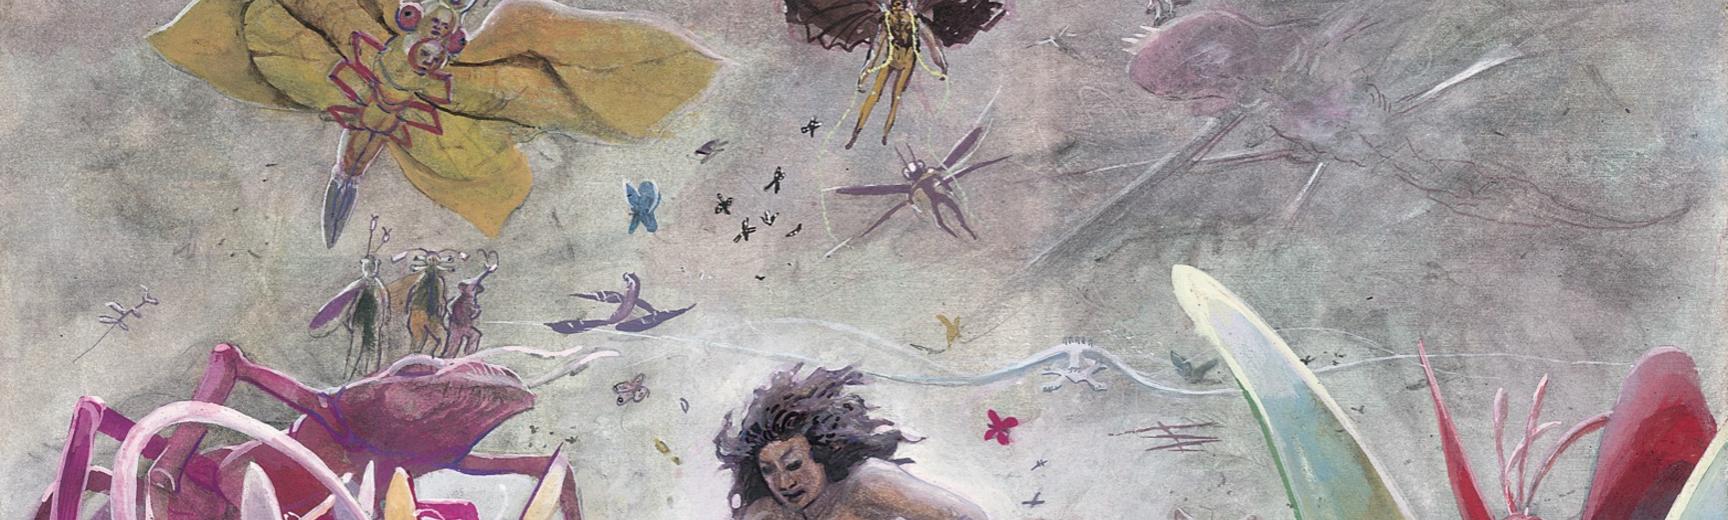 ‘Hi‘iaka breaks through the levels below Kilauea to find Lohi‘au and to destroy Pele’s beloved home (The Epic Tale of Hiʻiakaikapoliopele).’ Watercolour painting by Solomon Enos. 2005.